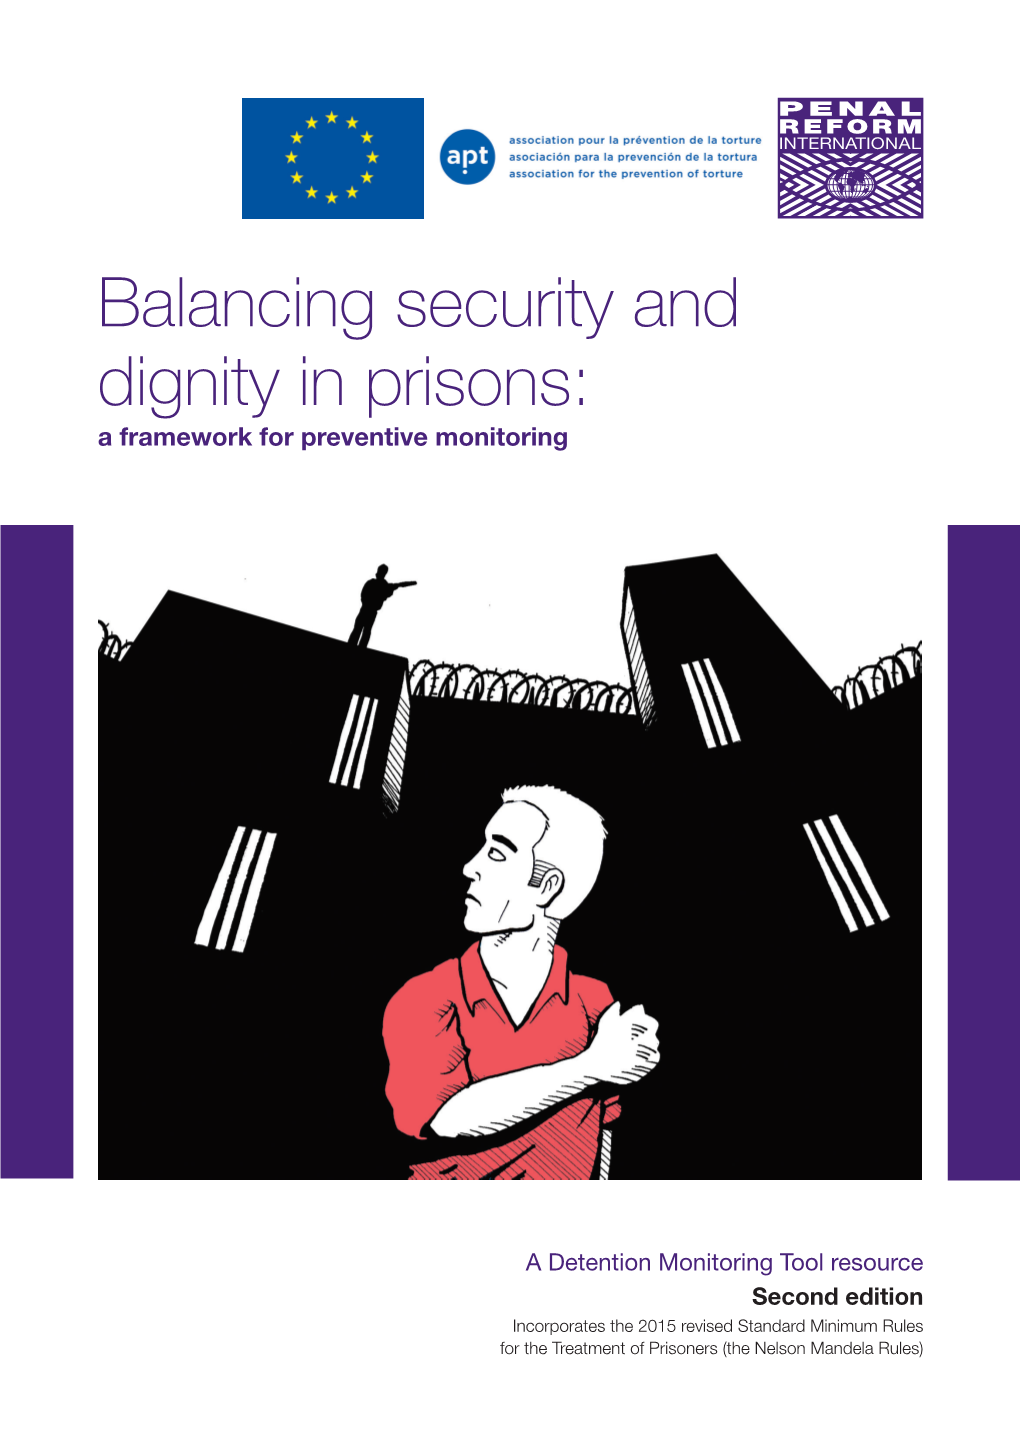 Balancing Security and Dignity in Prisons: a Framework for Preventive Monitoring